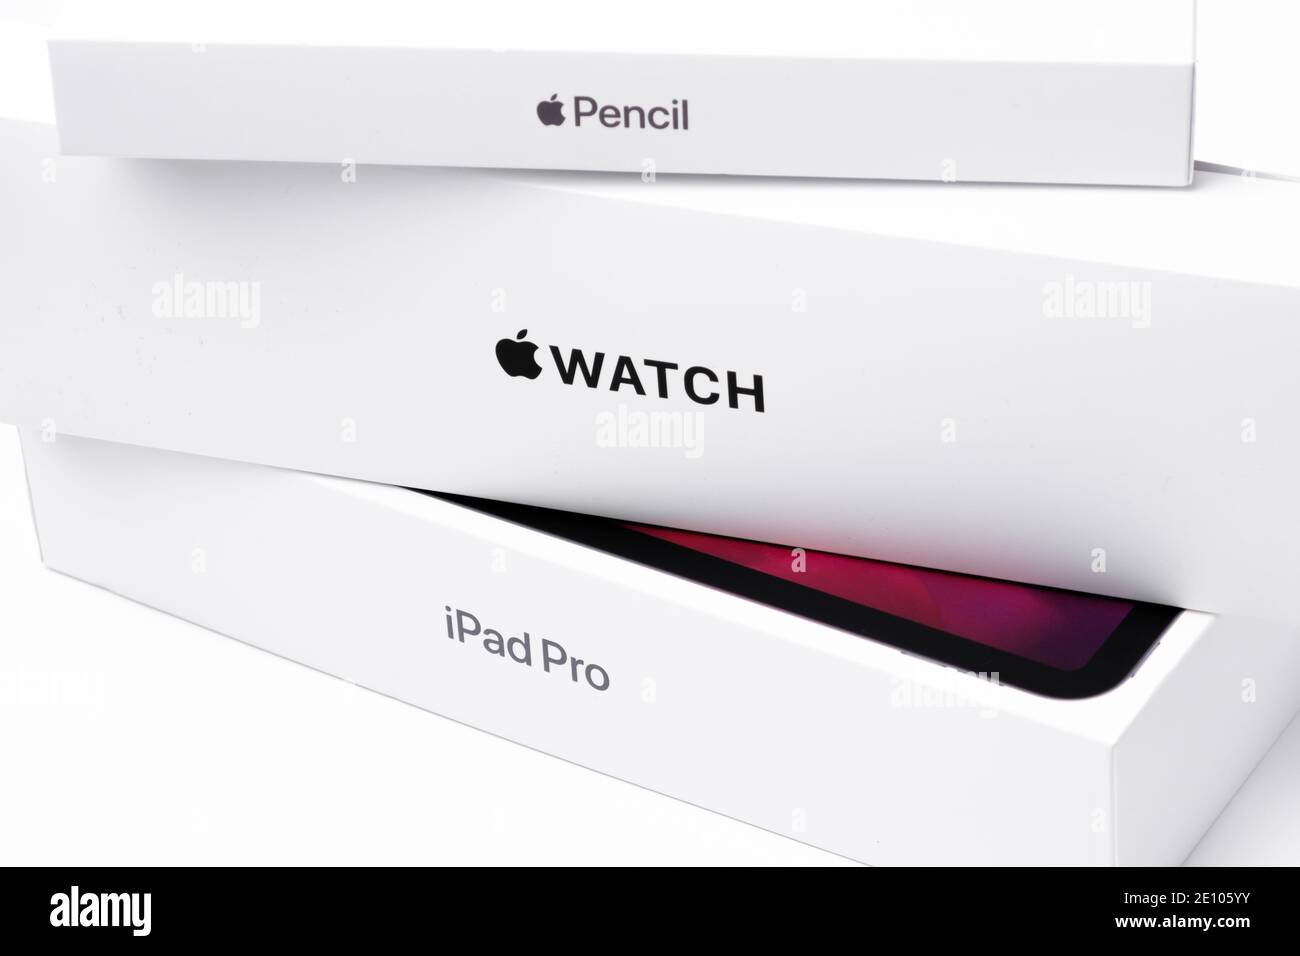 Apple pencil, watch, iPad pro boxes on the white background, December 2020, San Francisco, USA Stock Photo